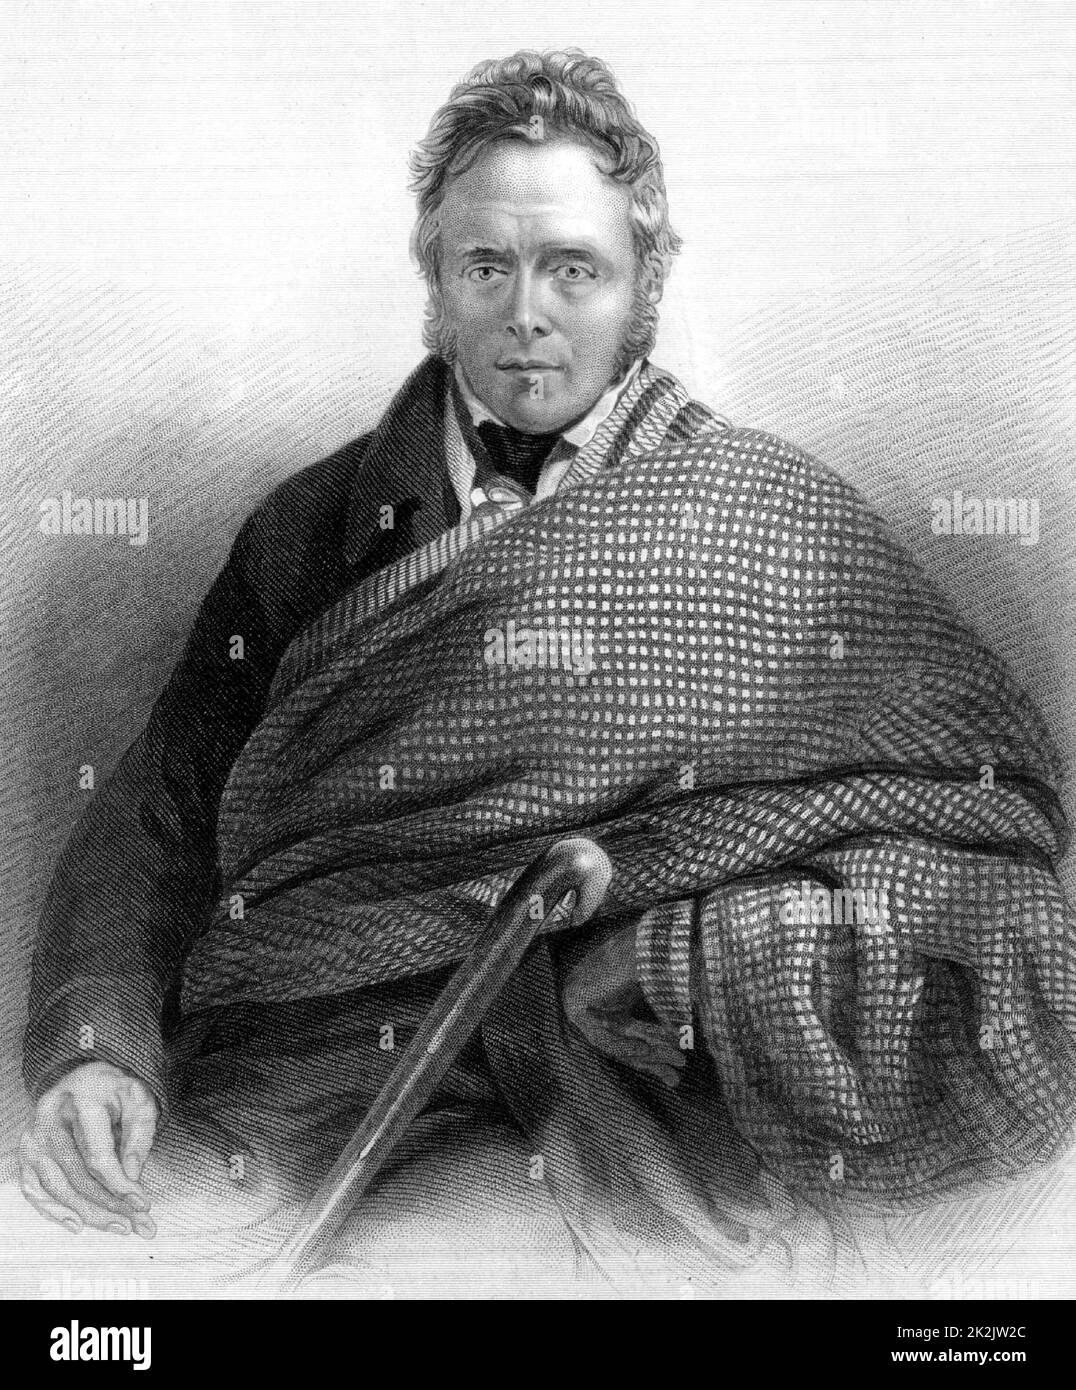 James Hogg, The Ettrick Shepherd (1770-1835) Scottish shepherd, poet and writer. His most important prose work is a novel 'The Private Memoirs and Confessions of a Justified Sinner', 1824.Engraving from 'A Biographical Dictionary of Eminent Scotsmen' by Thomas Thomson (1870). Stock Photo